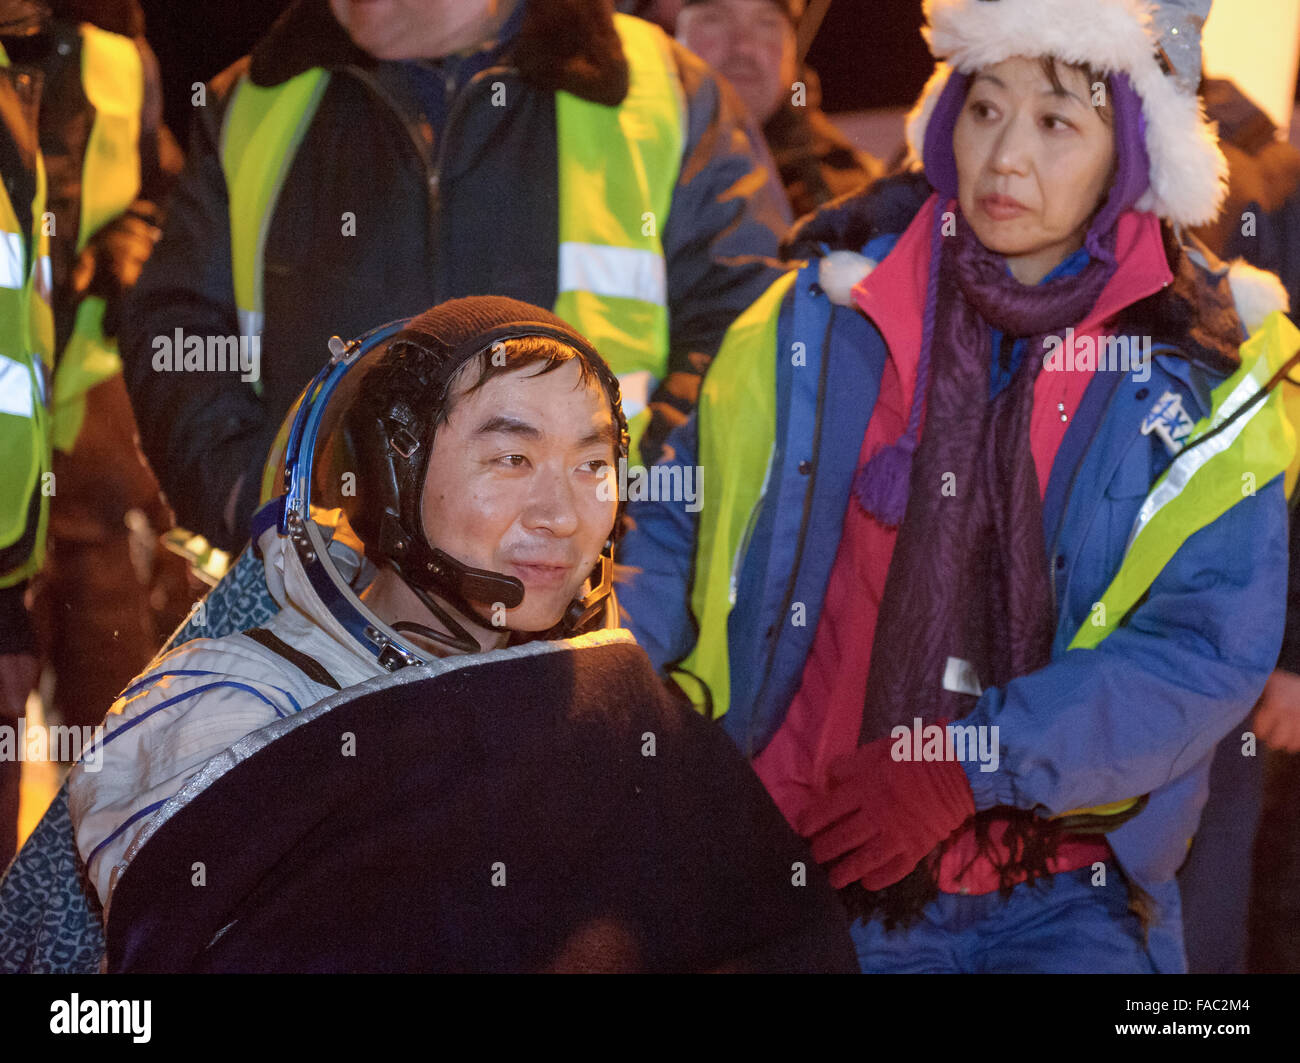 International Space Station Expedition 45 crew member Japanese astronaut Kimya Yui of the Japan Aerospace Exploration Agency is carried to the medical tent moments after landing in a remote area in the Soyuz TMA-17M spacecraft December 11, 2015 near Zhezkazgan, Kazakhstan. The crew is returning after 141 days onboard the International Space Station. Stock Photo